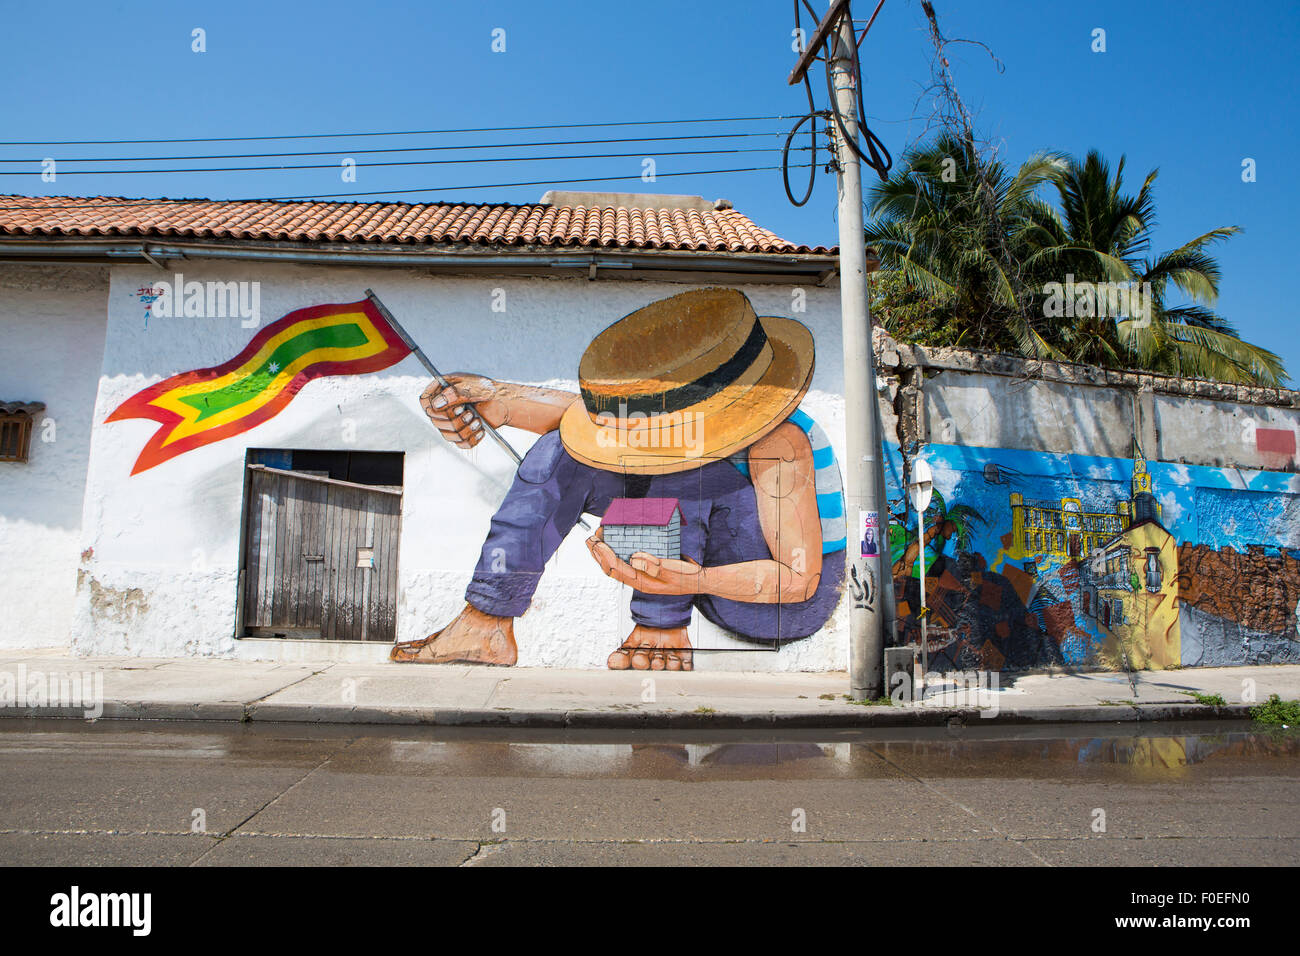 Graffiti in the old streets of Cartagena in Colombia. Made by Jade in 2013. Blue sky in the background. Stock Photo